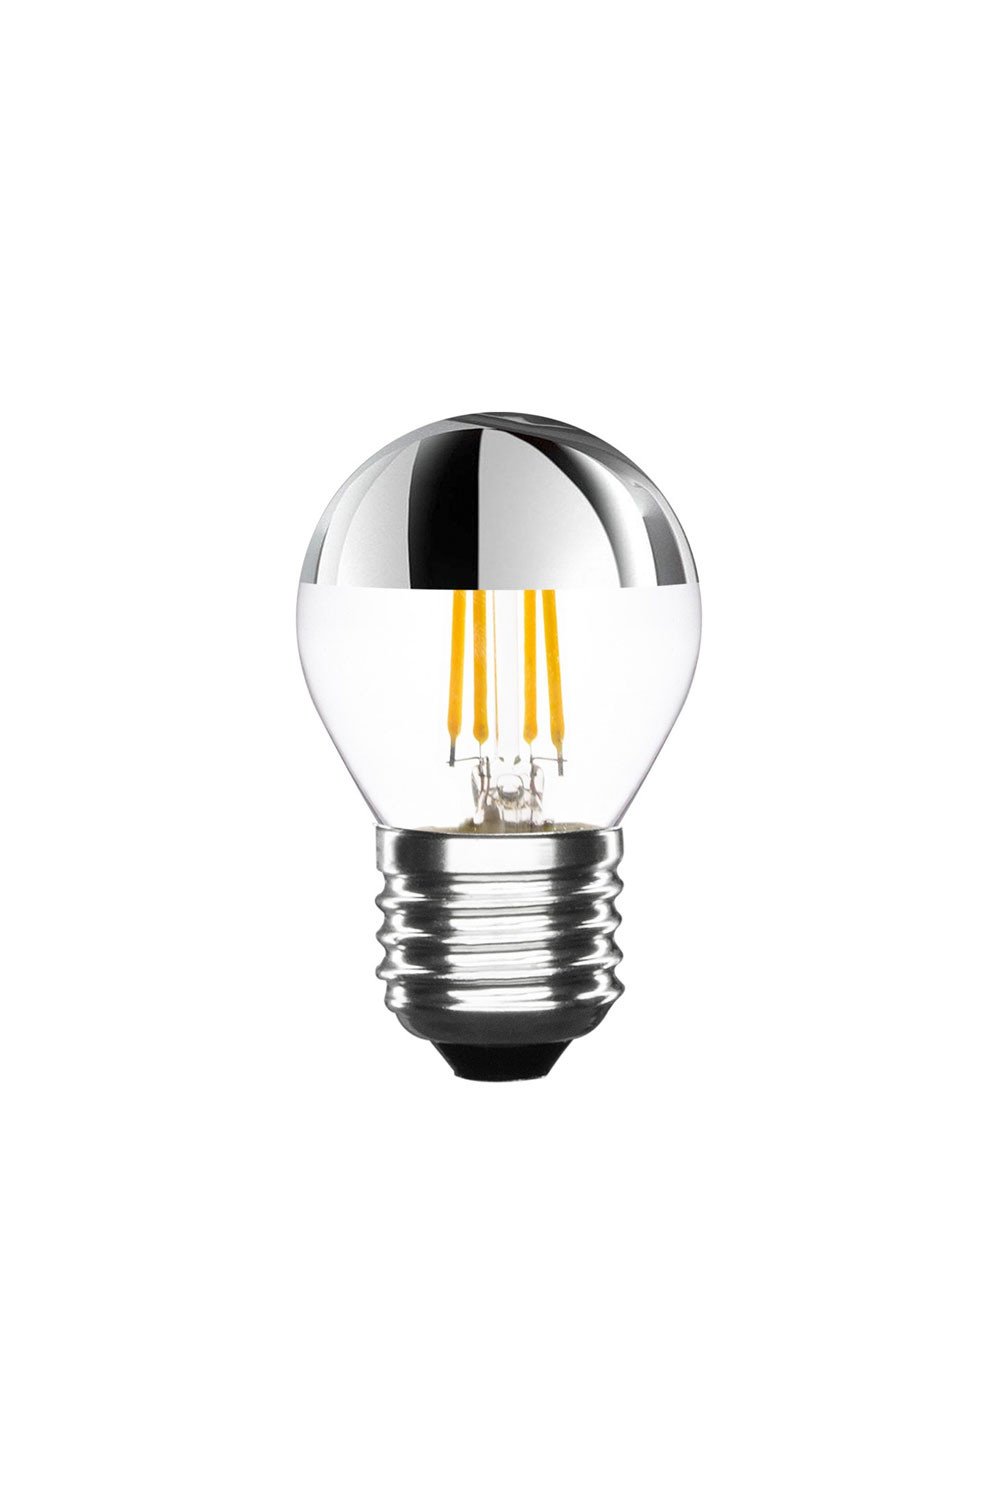 Dimmable and Reflective Vintage LED Bulb E27 Class, gallery image 1